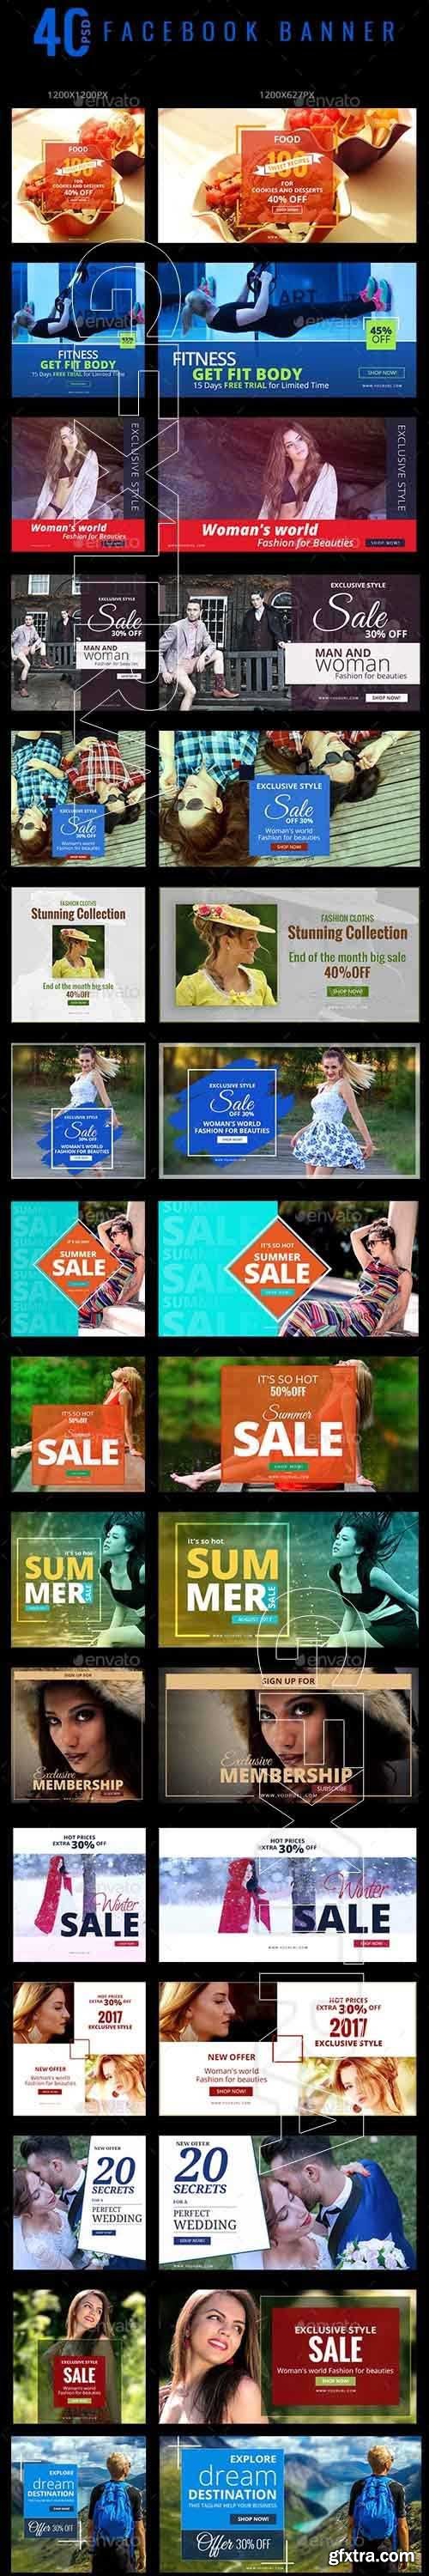 GraphicRiver - 40 Facebook Banners 20482228